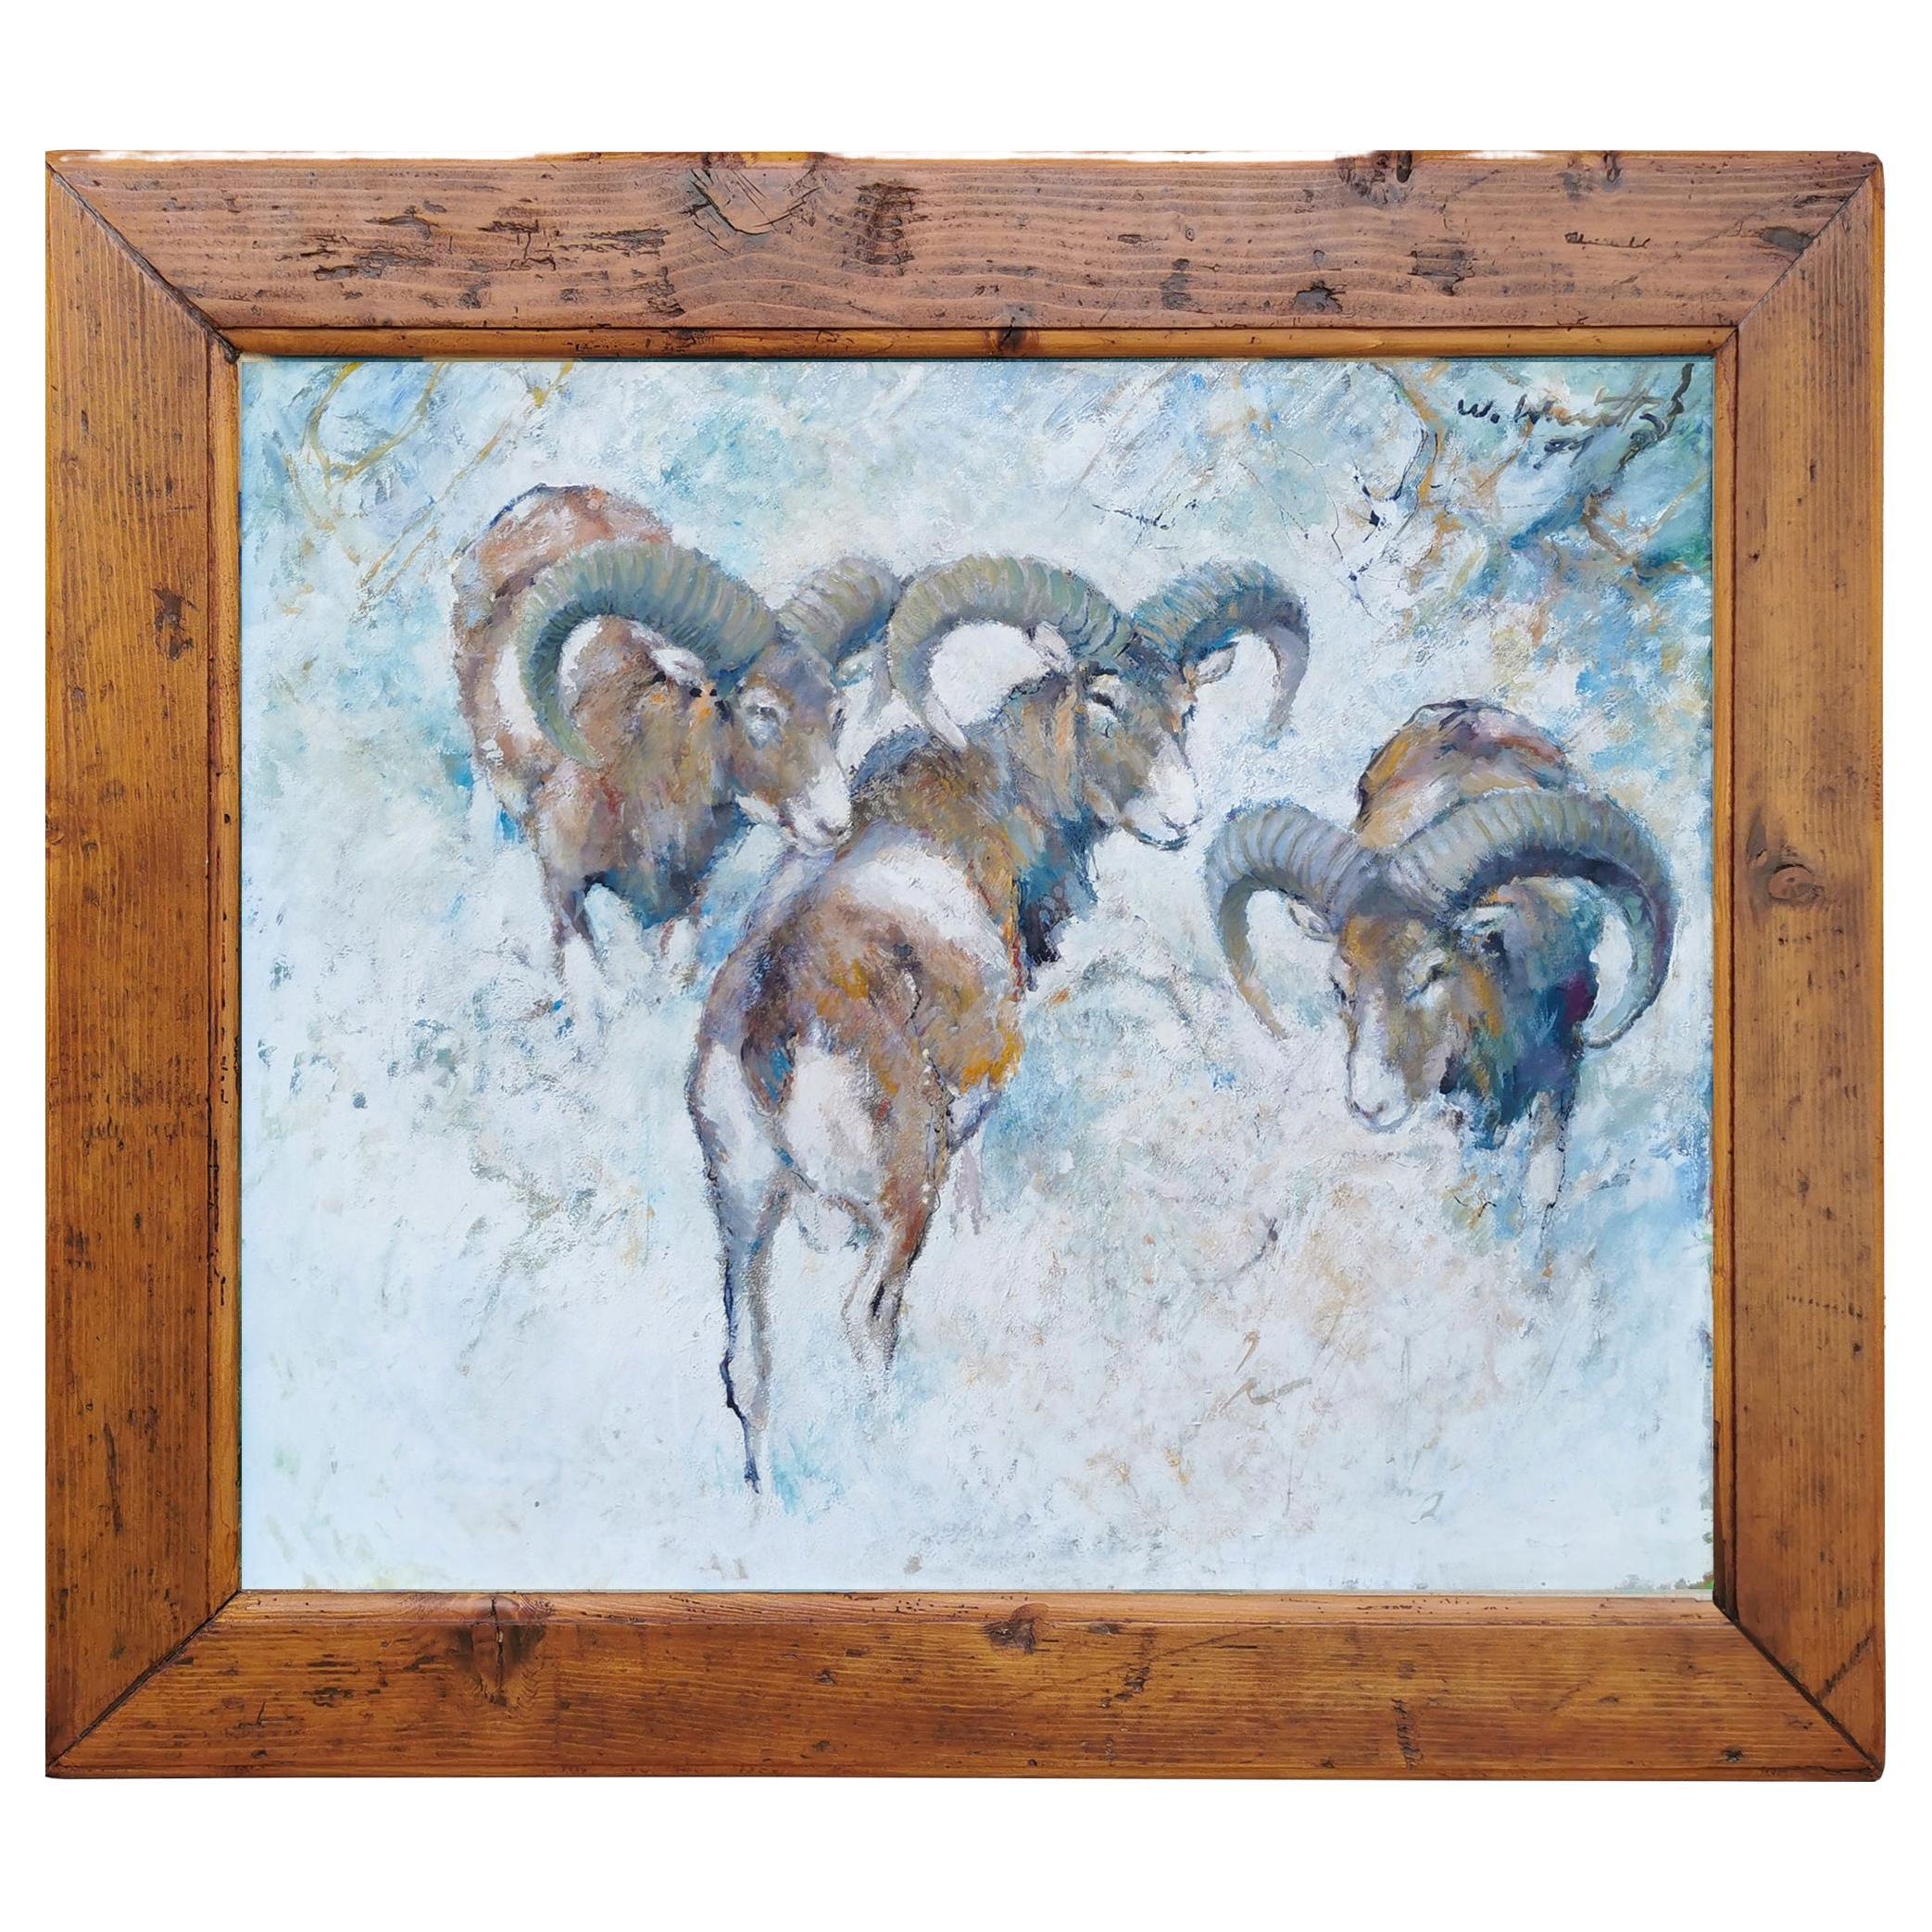 Mouflons in the Snow Oil on Canvas Painting by Willi Schütz, 1971